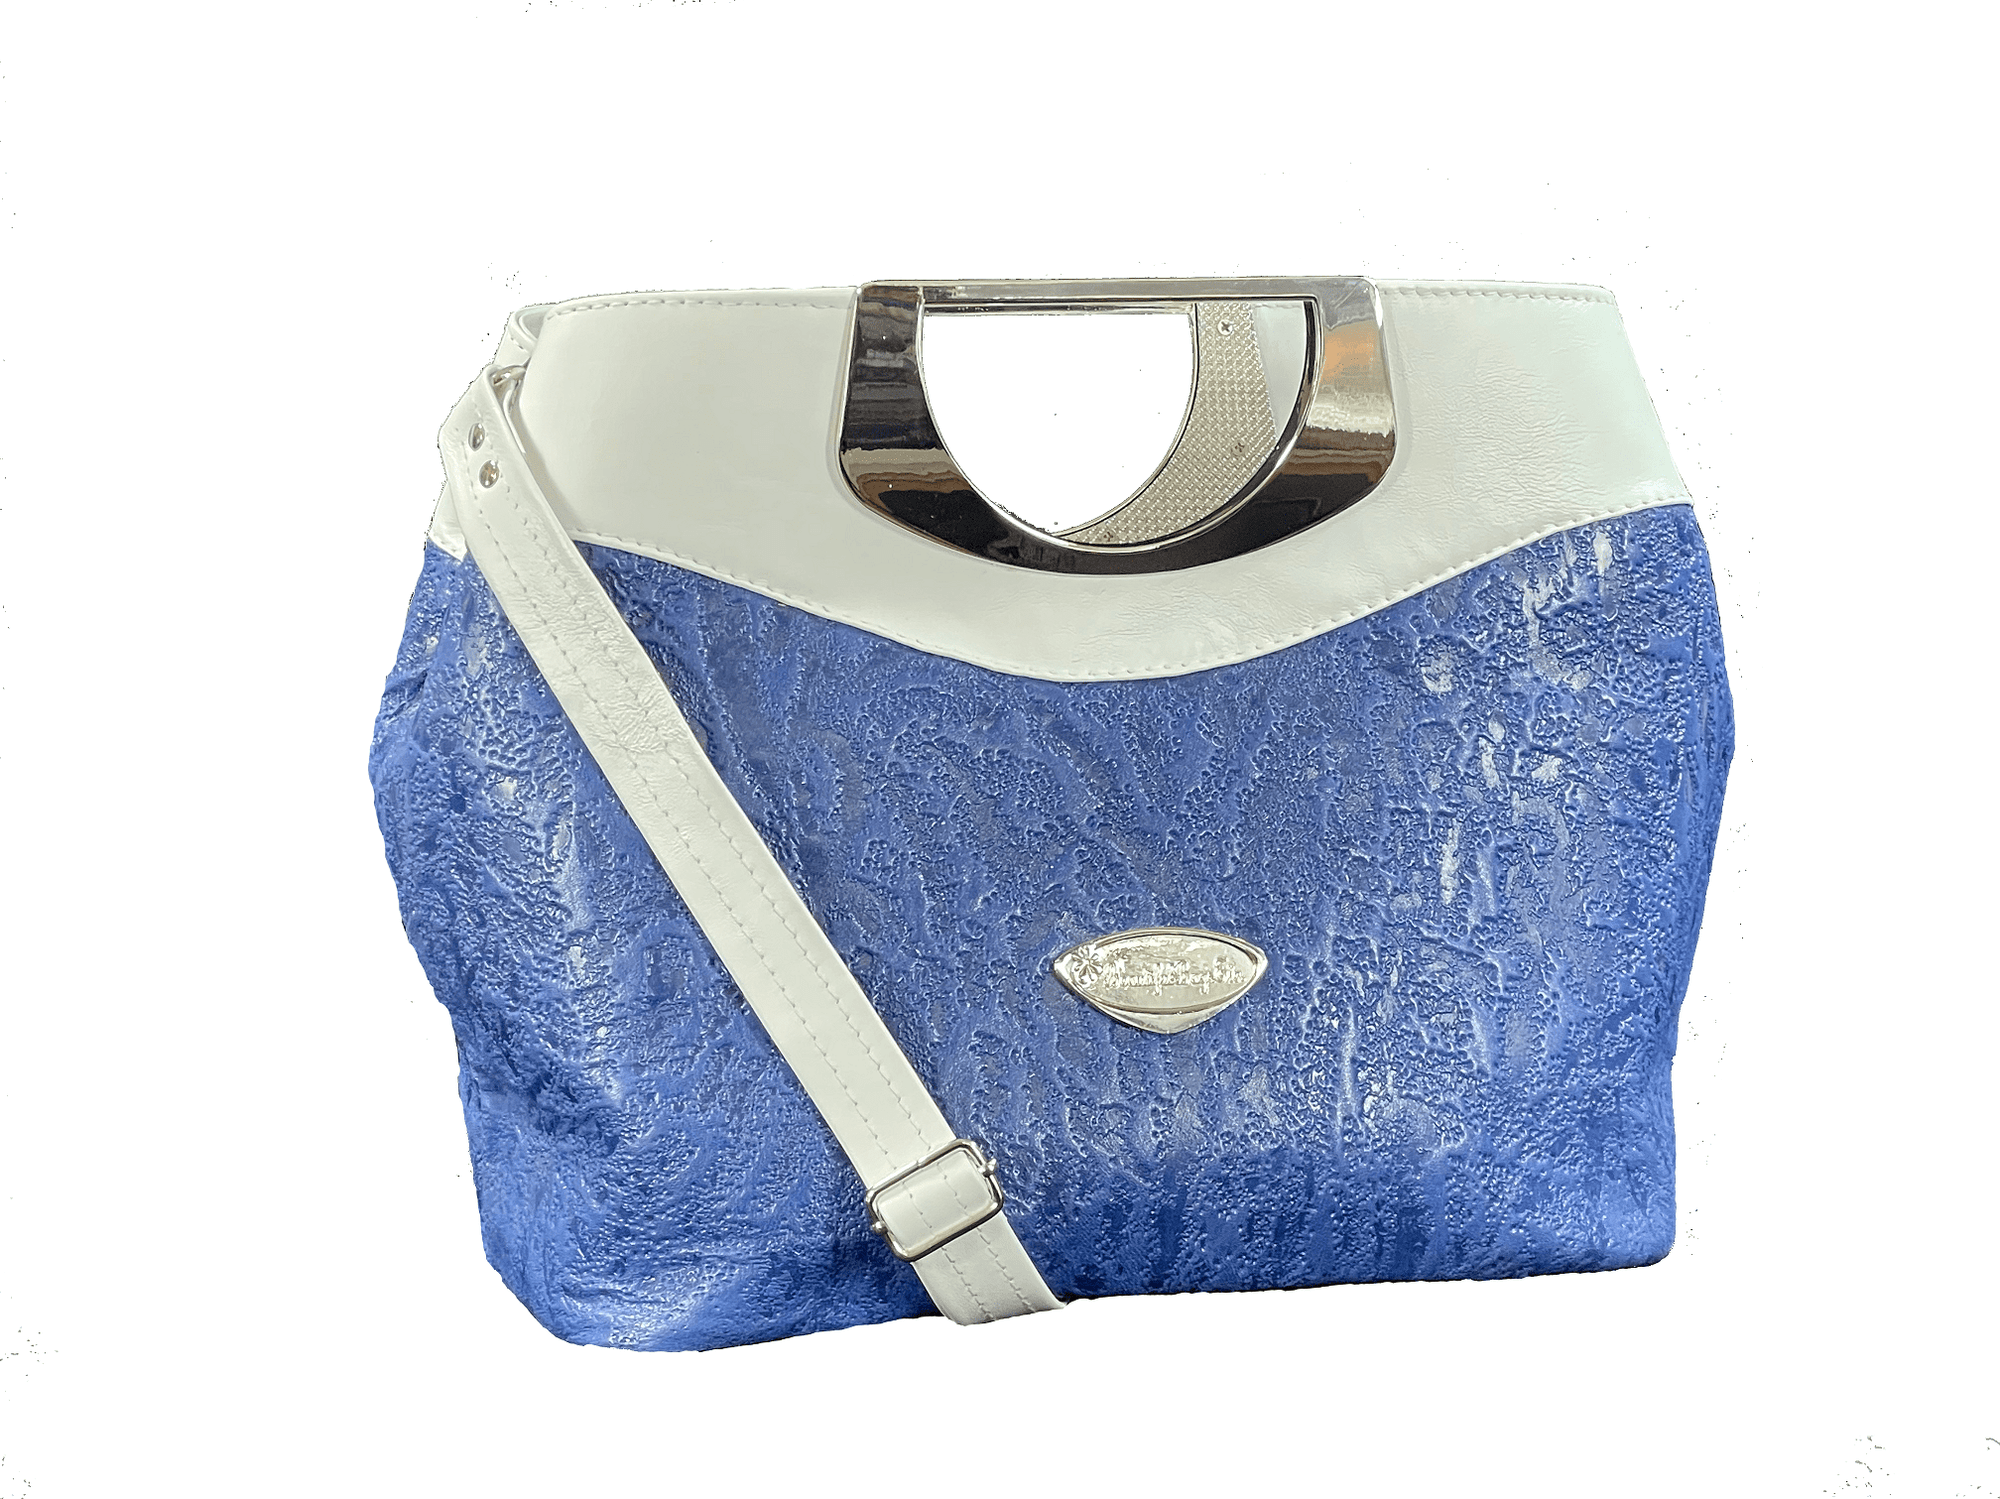 Fifth Avenue Blue and White Leather Satchel